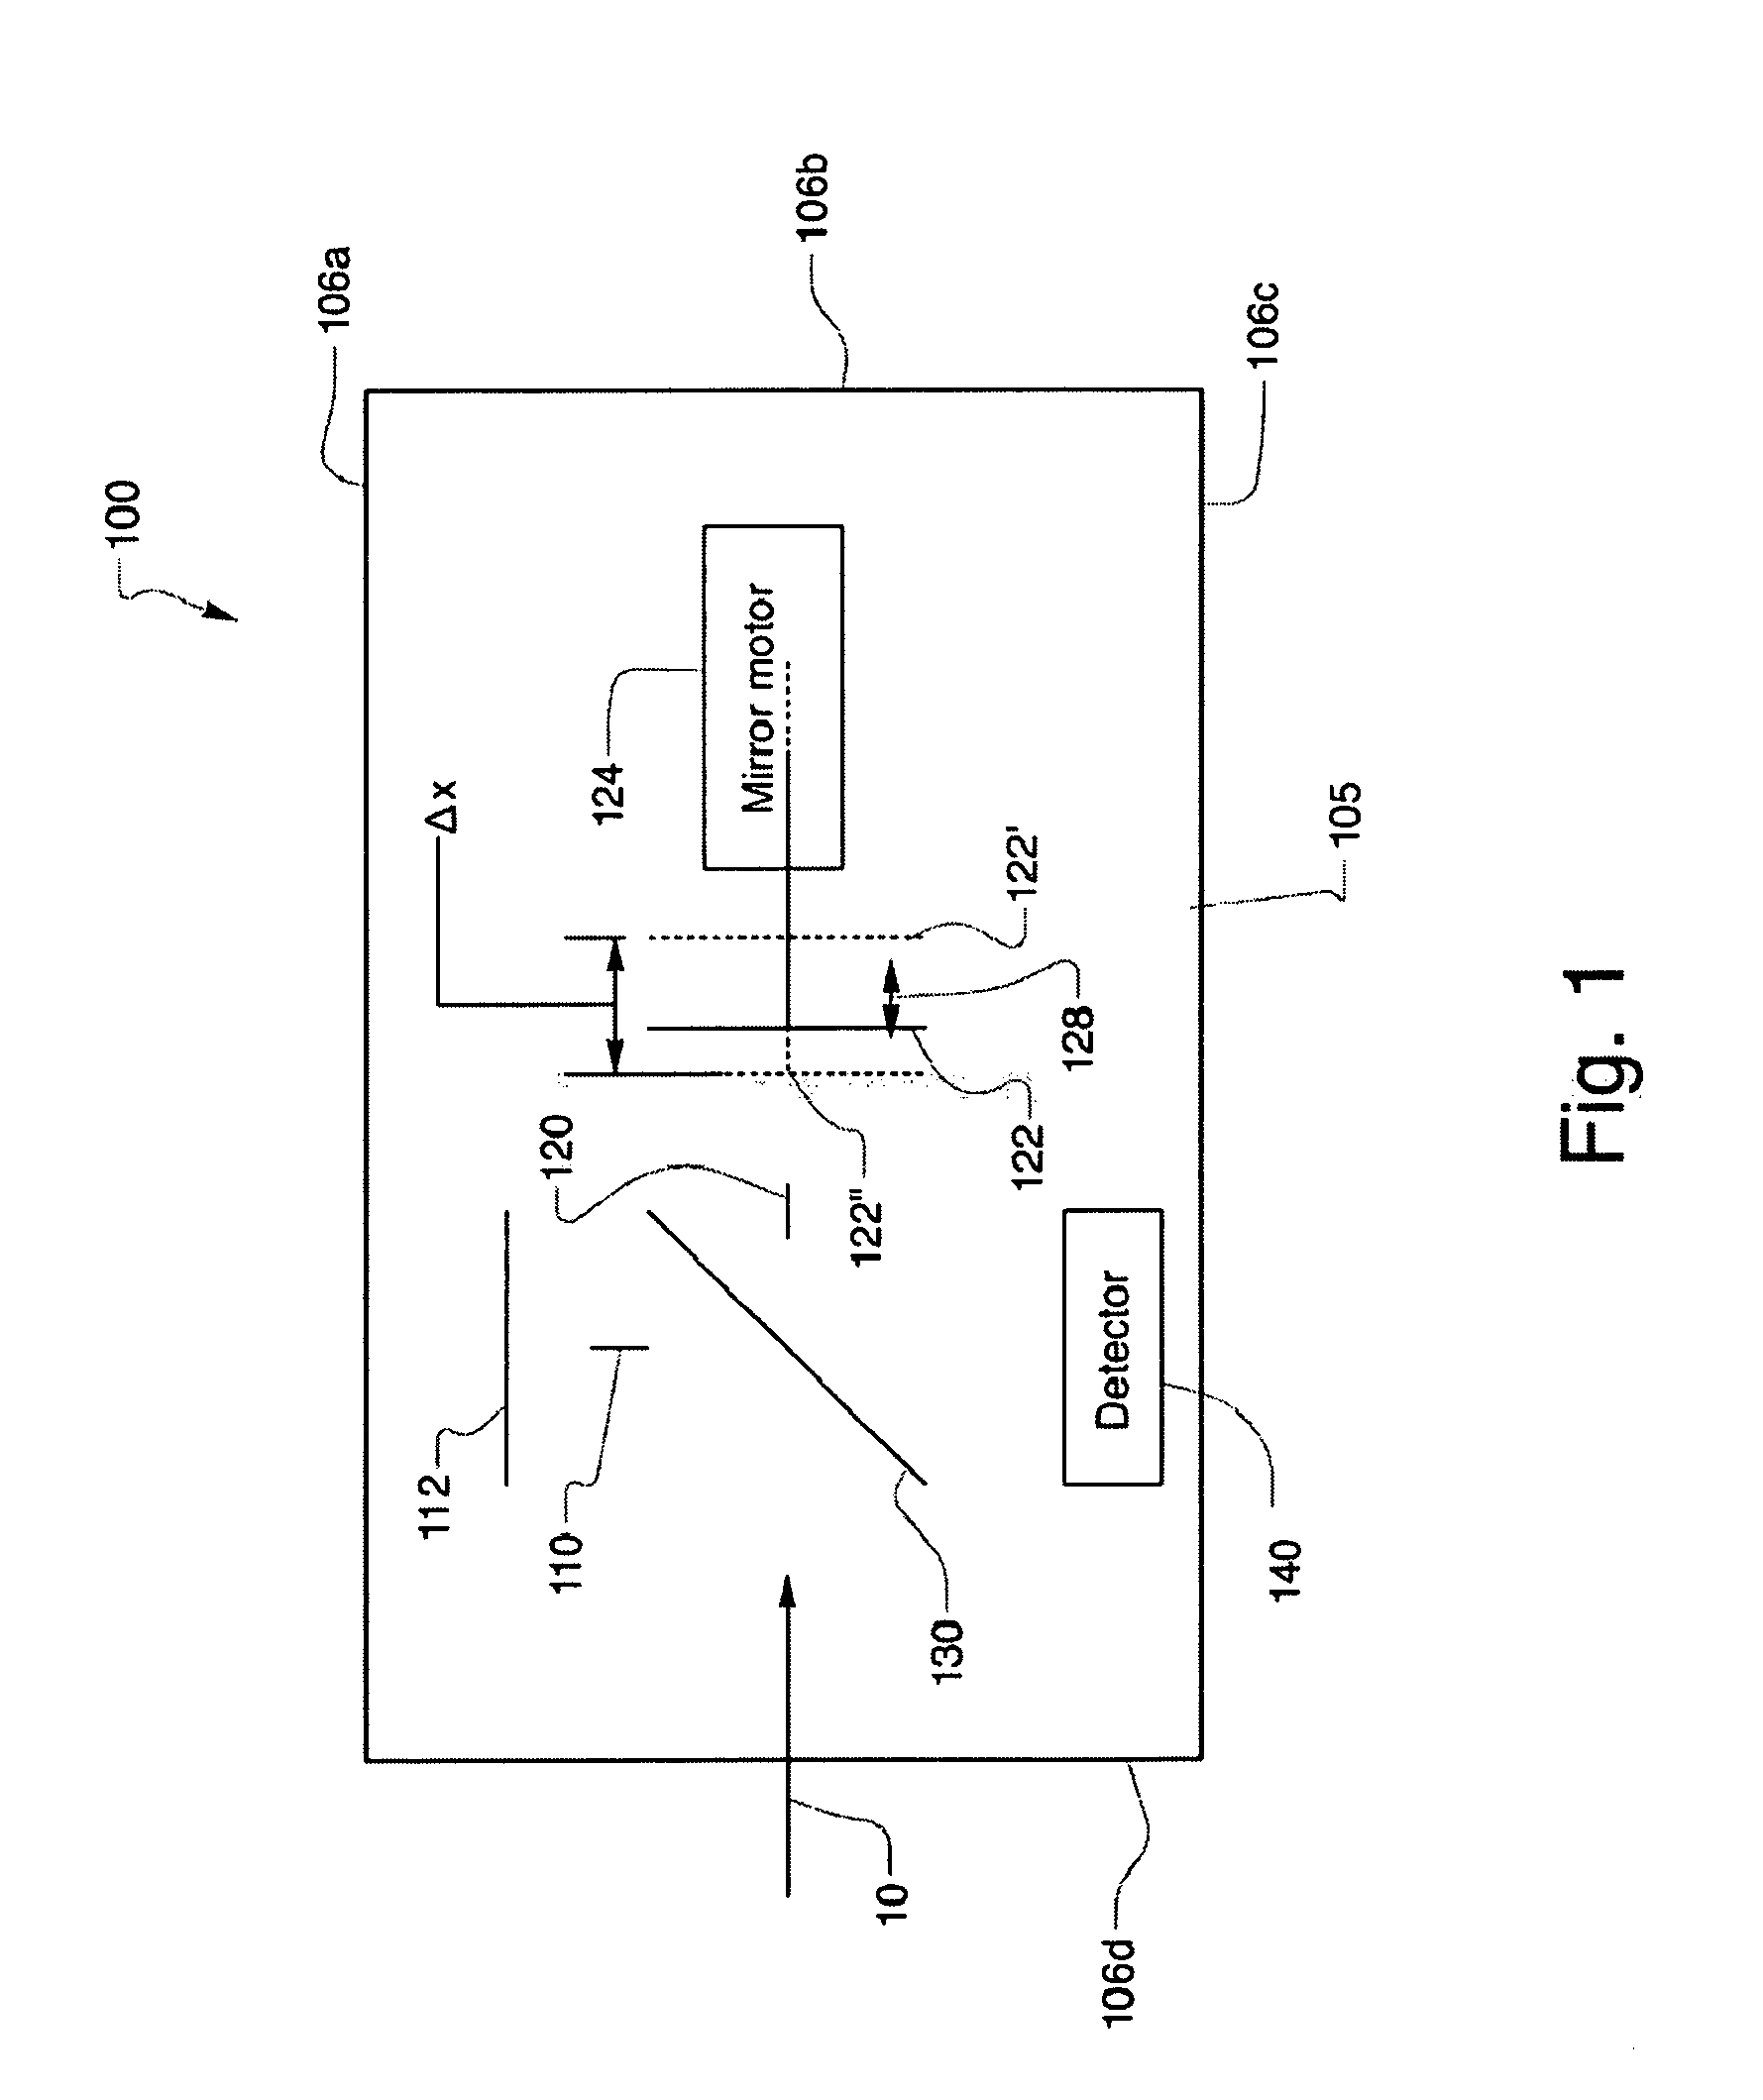 Miniature Fourier Transform Spectrometer and Method of Operation